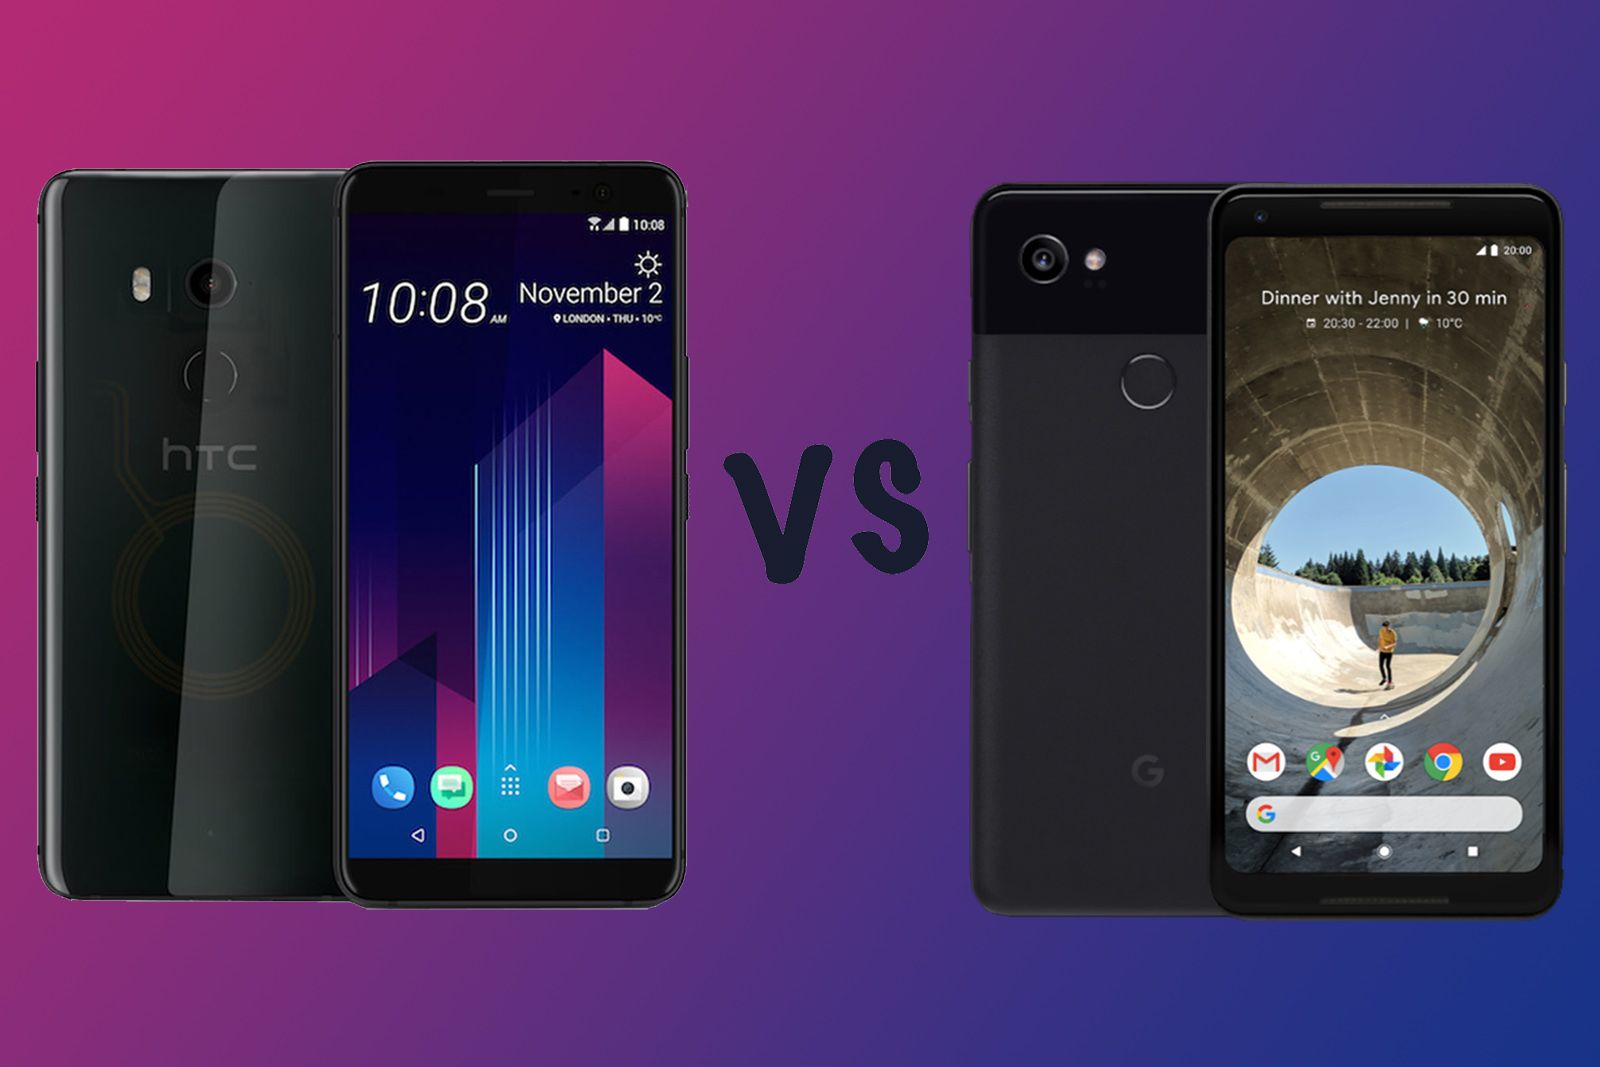 HTC U11 vs Google Pixel 2 XL Whats the difference image 1